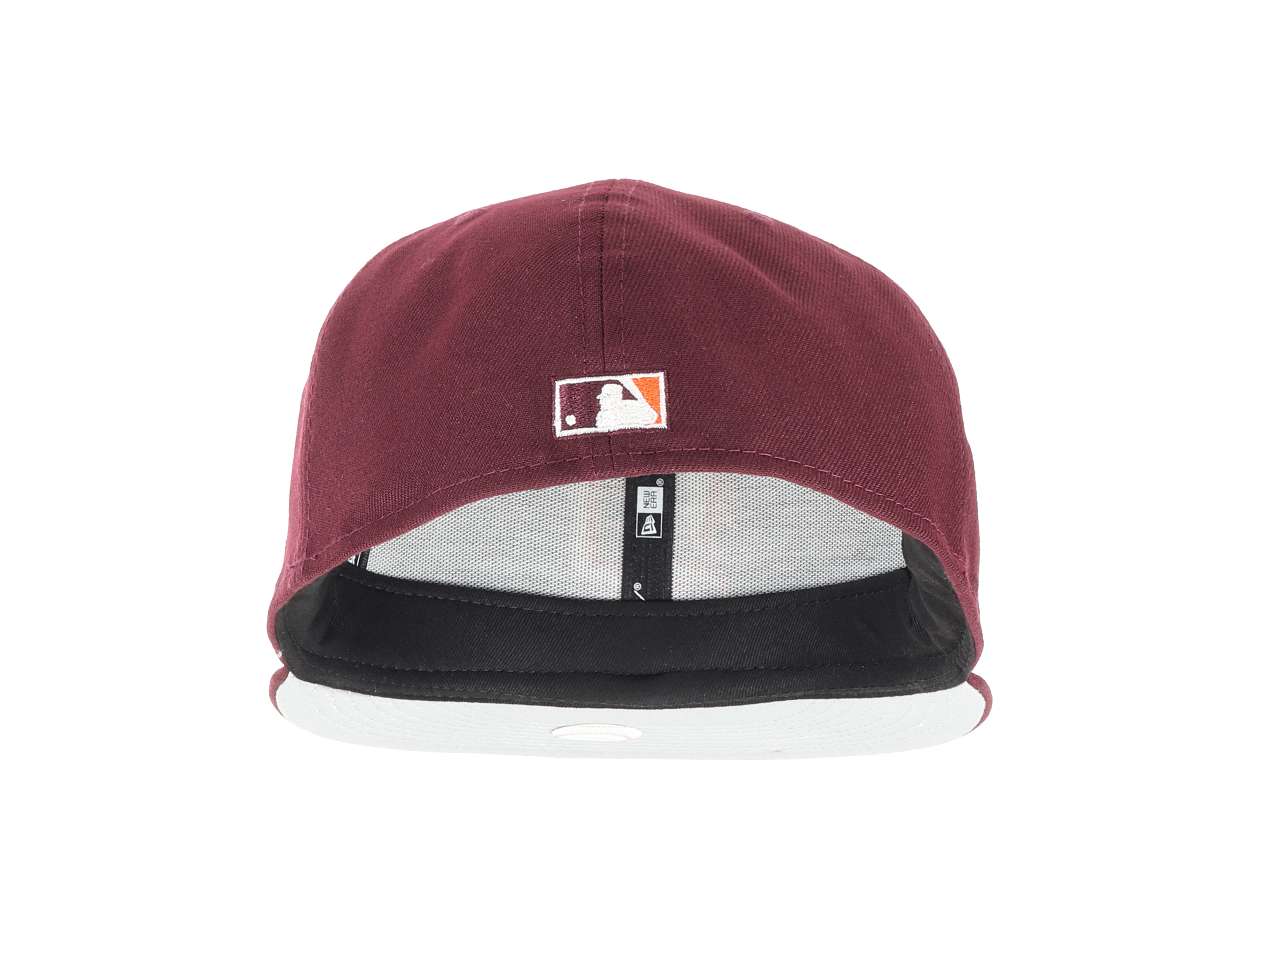 Detroit Tigers MLB Cooperstown Maroon 59Fifty Basecap New Era